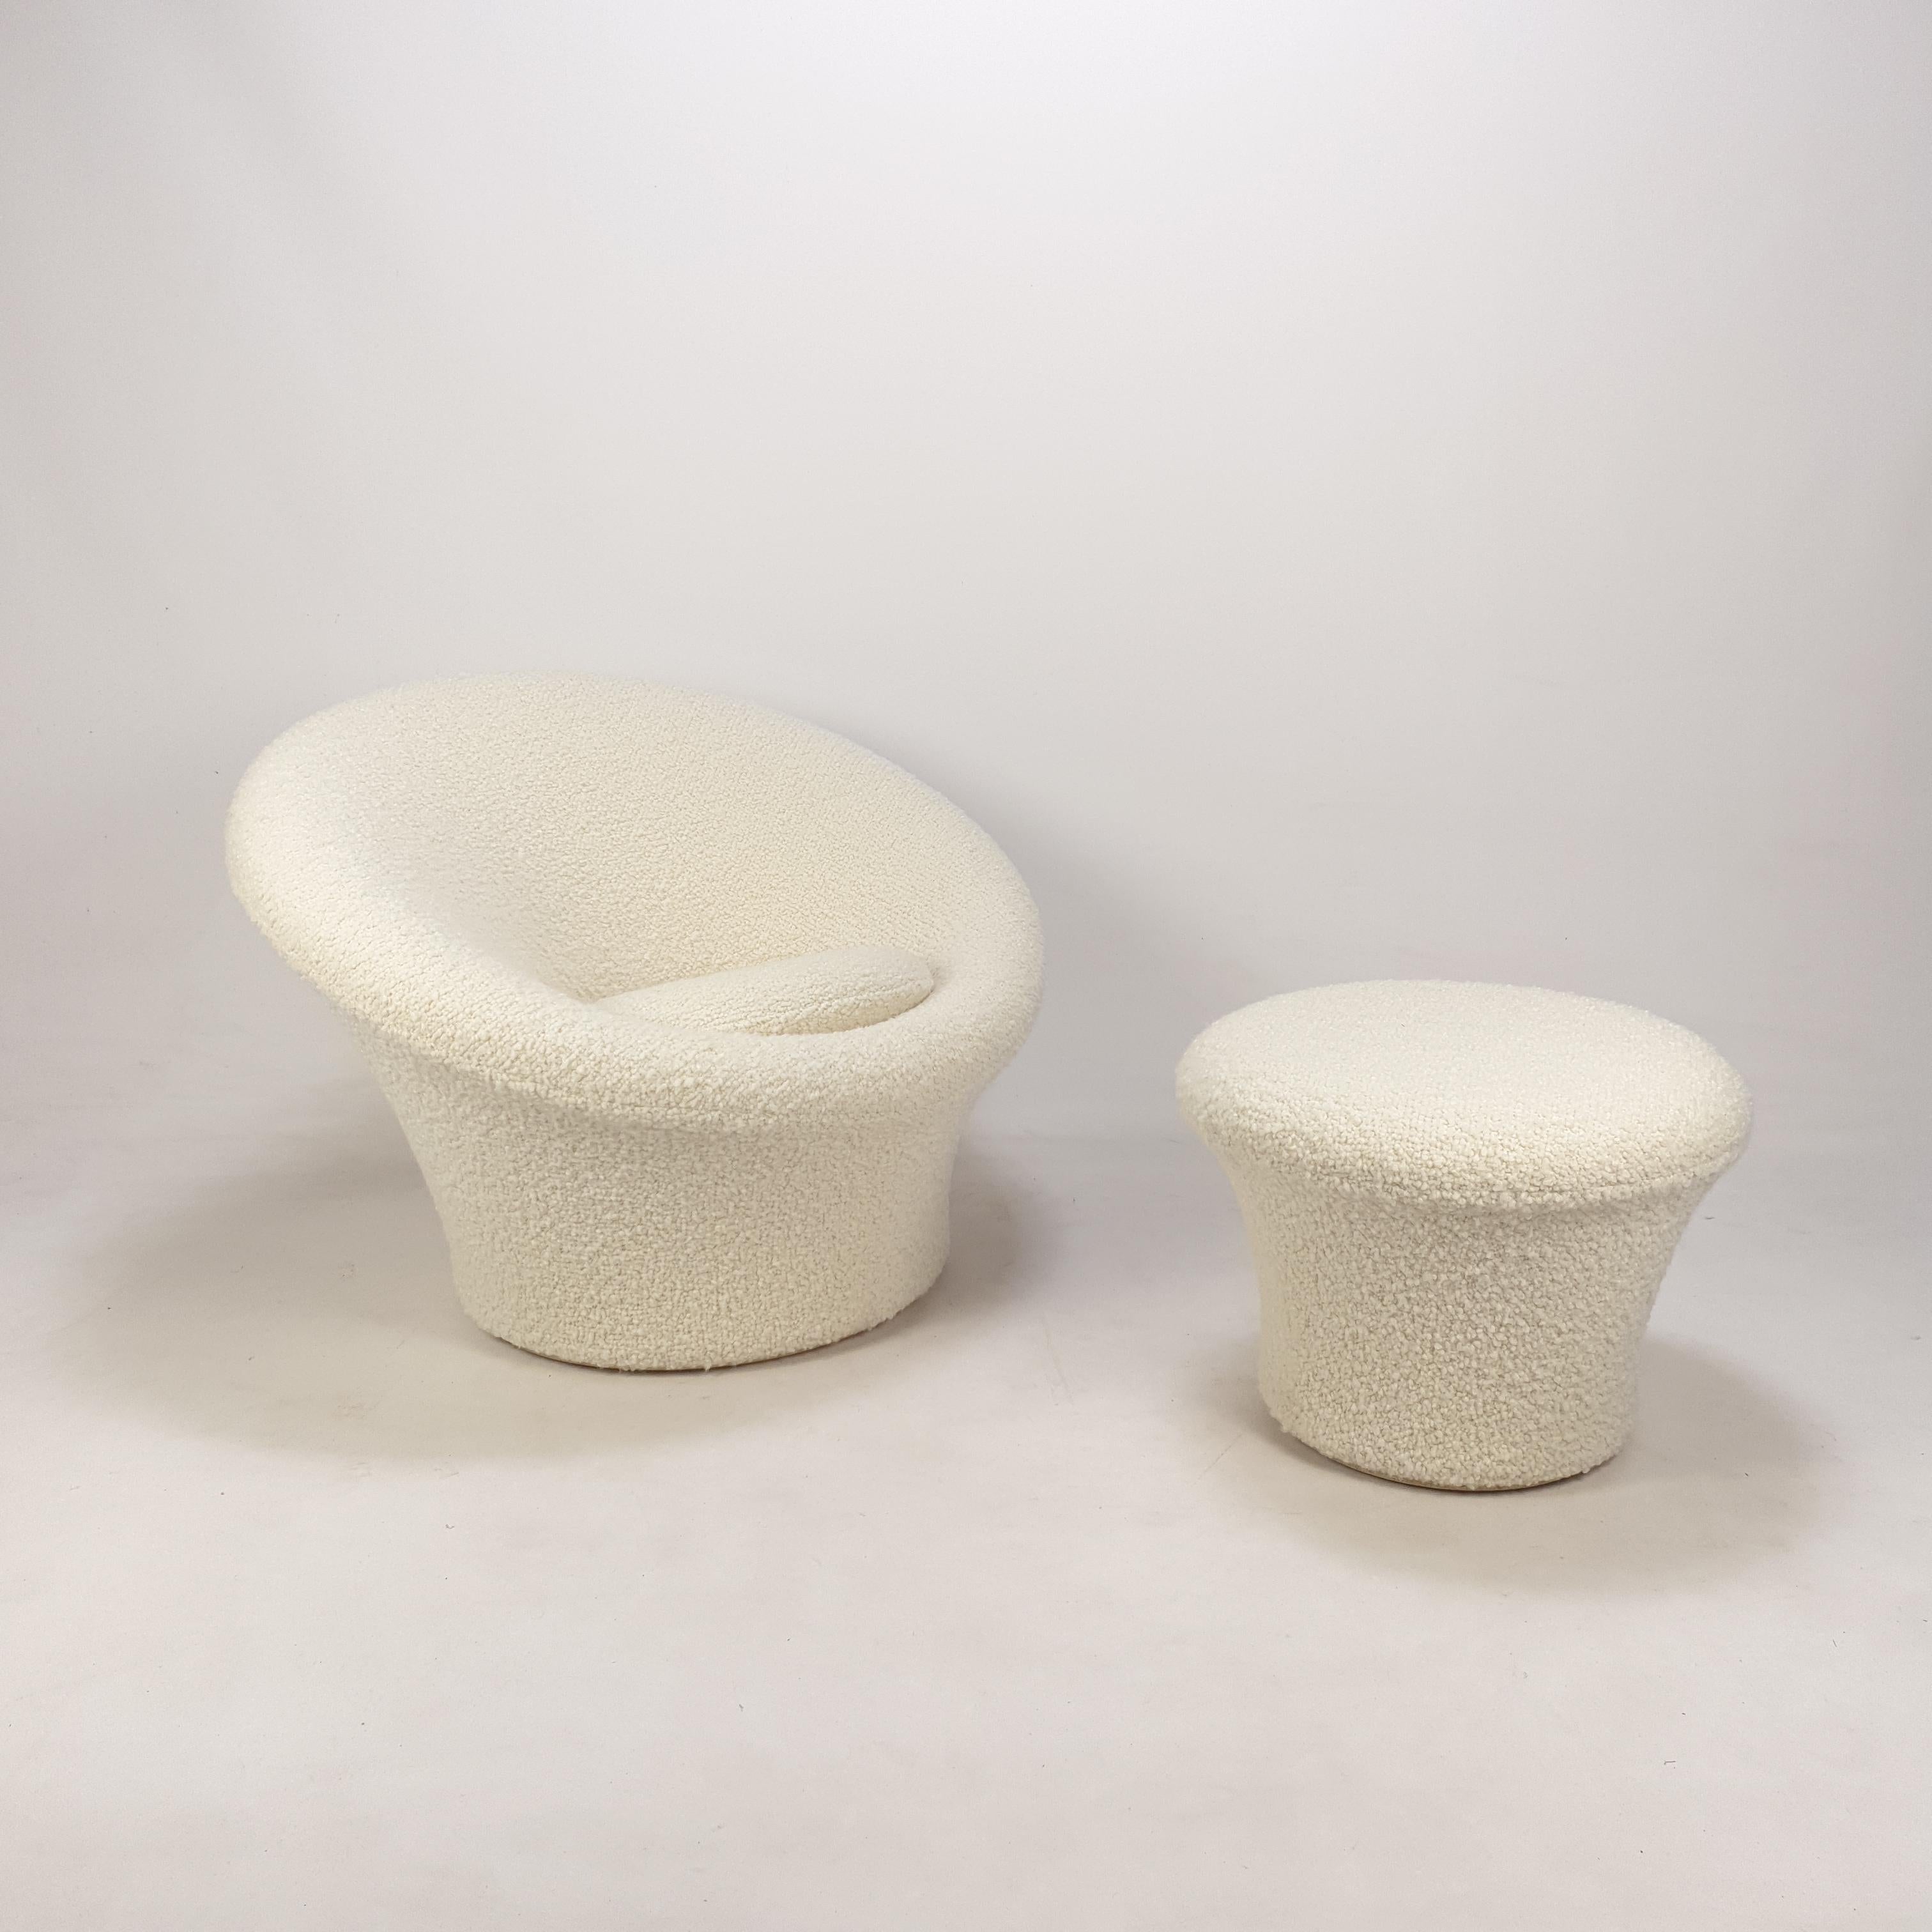 Very comfortable and cosy Artifort Mushroom set, designed by Pierre Paulin in the 60’s. 

Covered with very soft Italian bouclé fabric. 

The chair and pouf are completely restored by a French Pierre Paulin specialist, they are in perfect